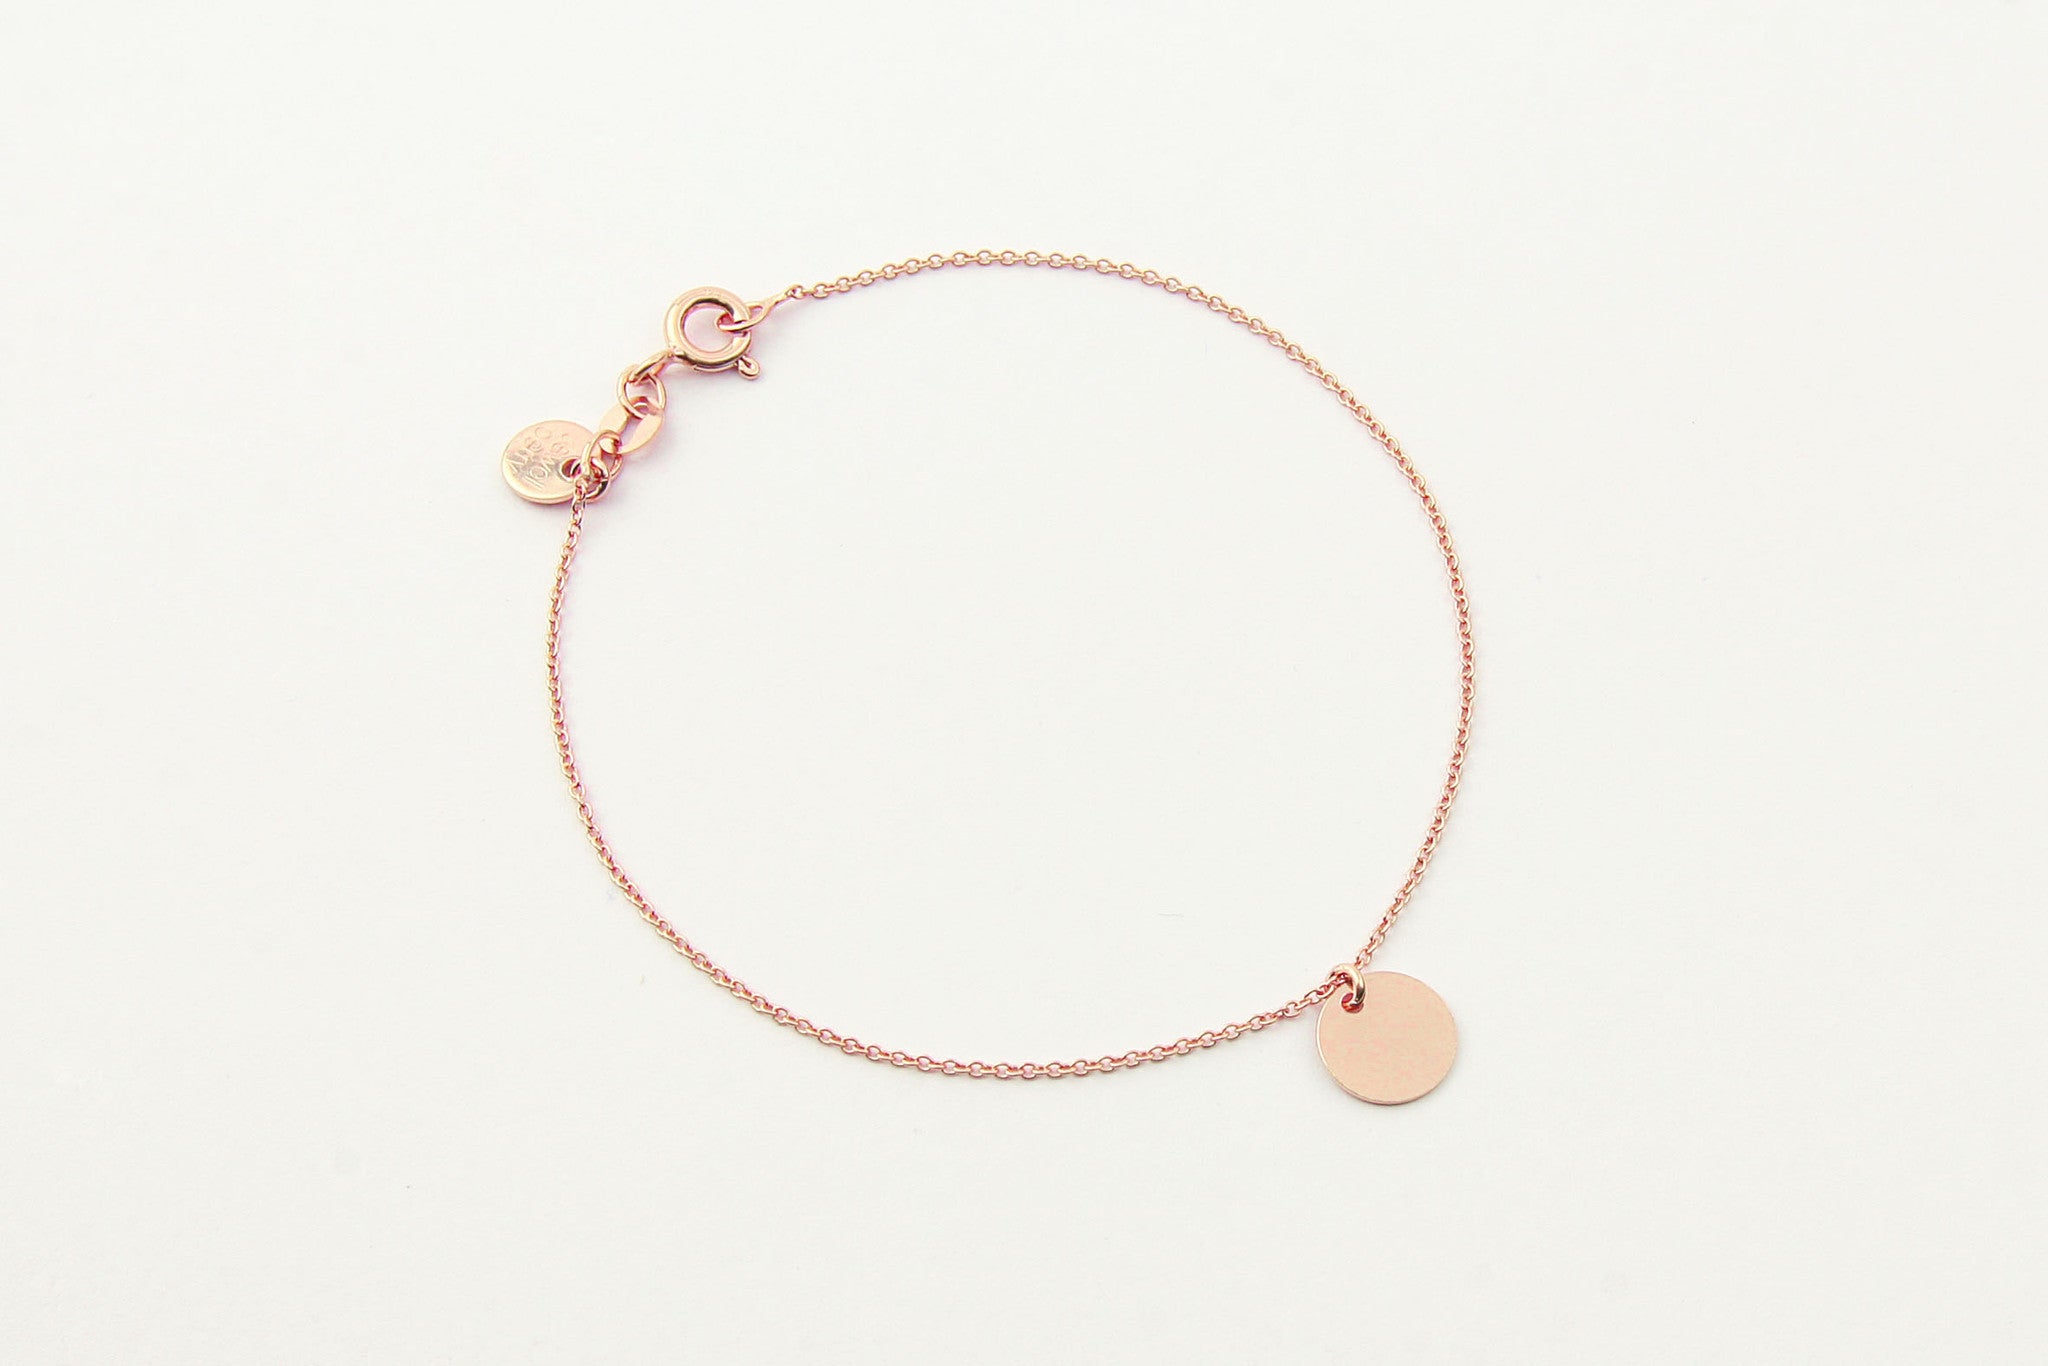 jewelberry armband bracelet small disc rose gold plated sterling silver fine jewelry handmade with love fairtrade anchor chain